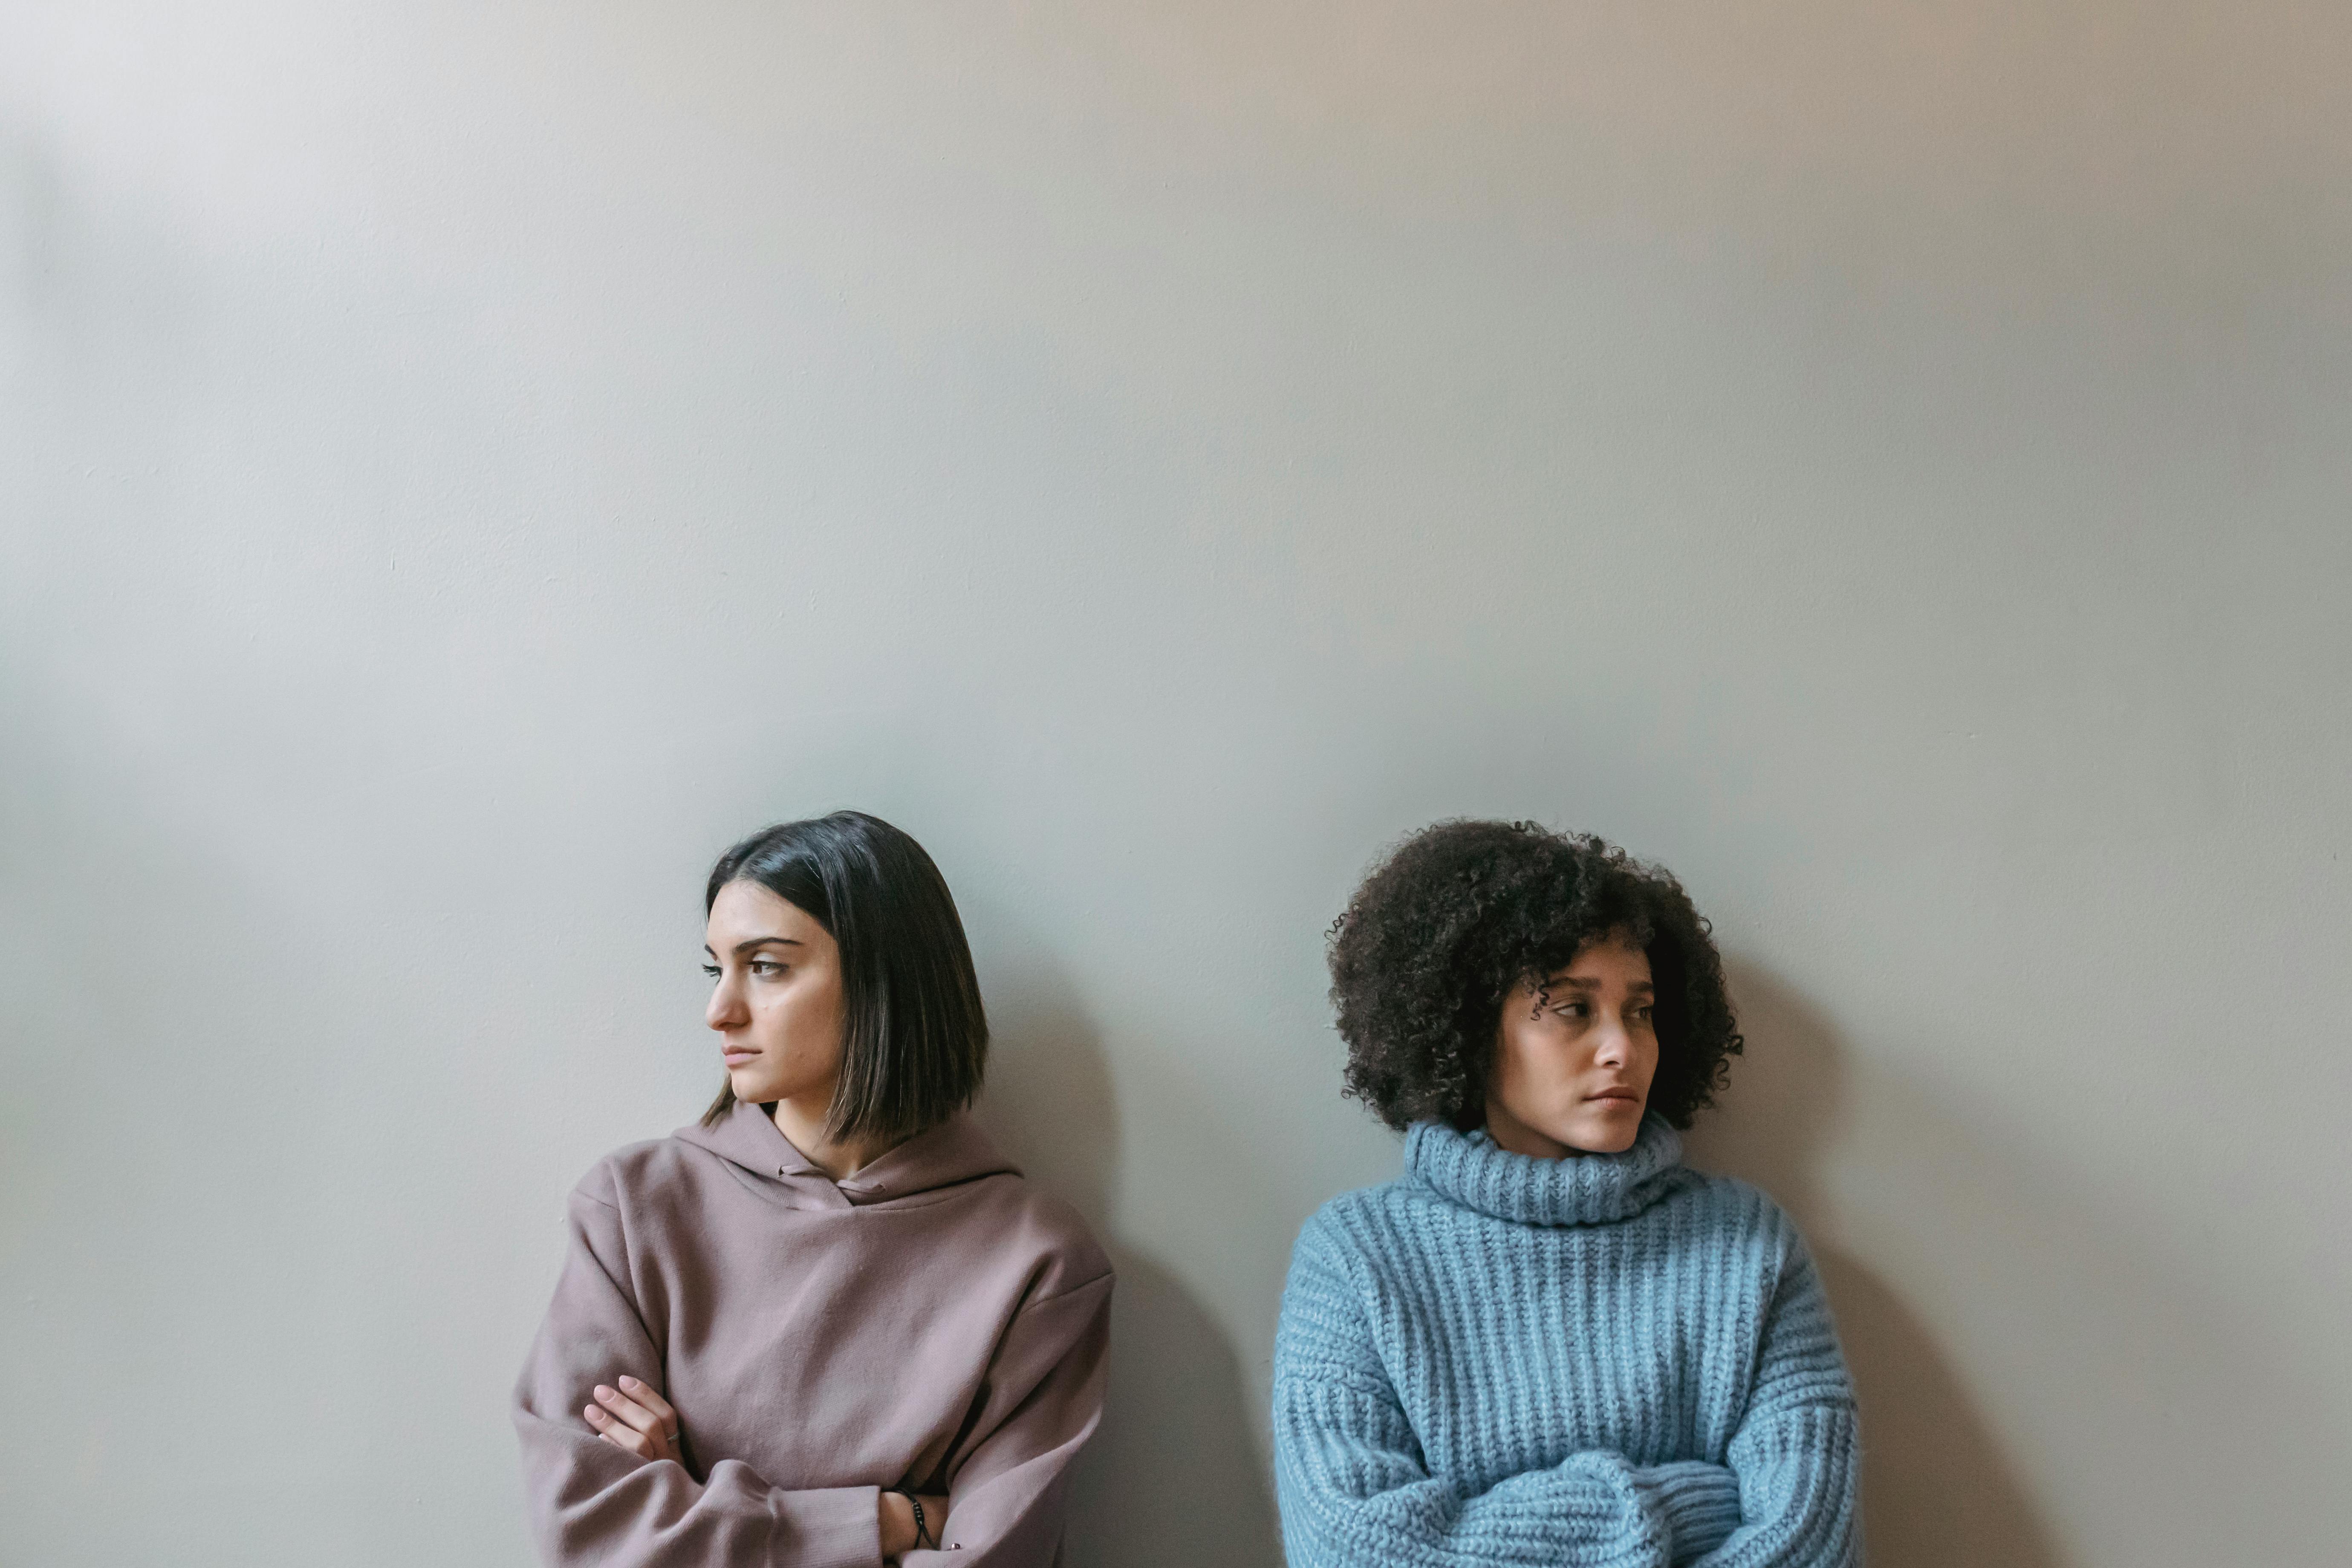 Two women at odds | Source: Pexels